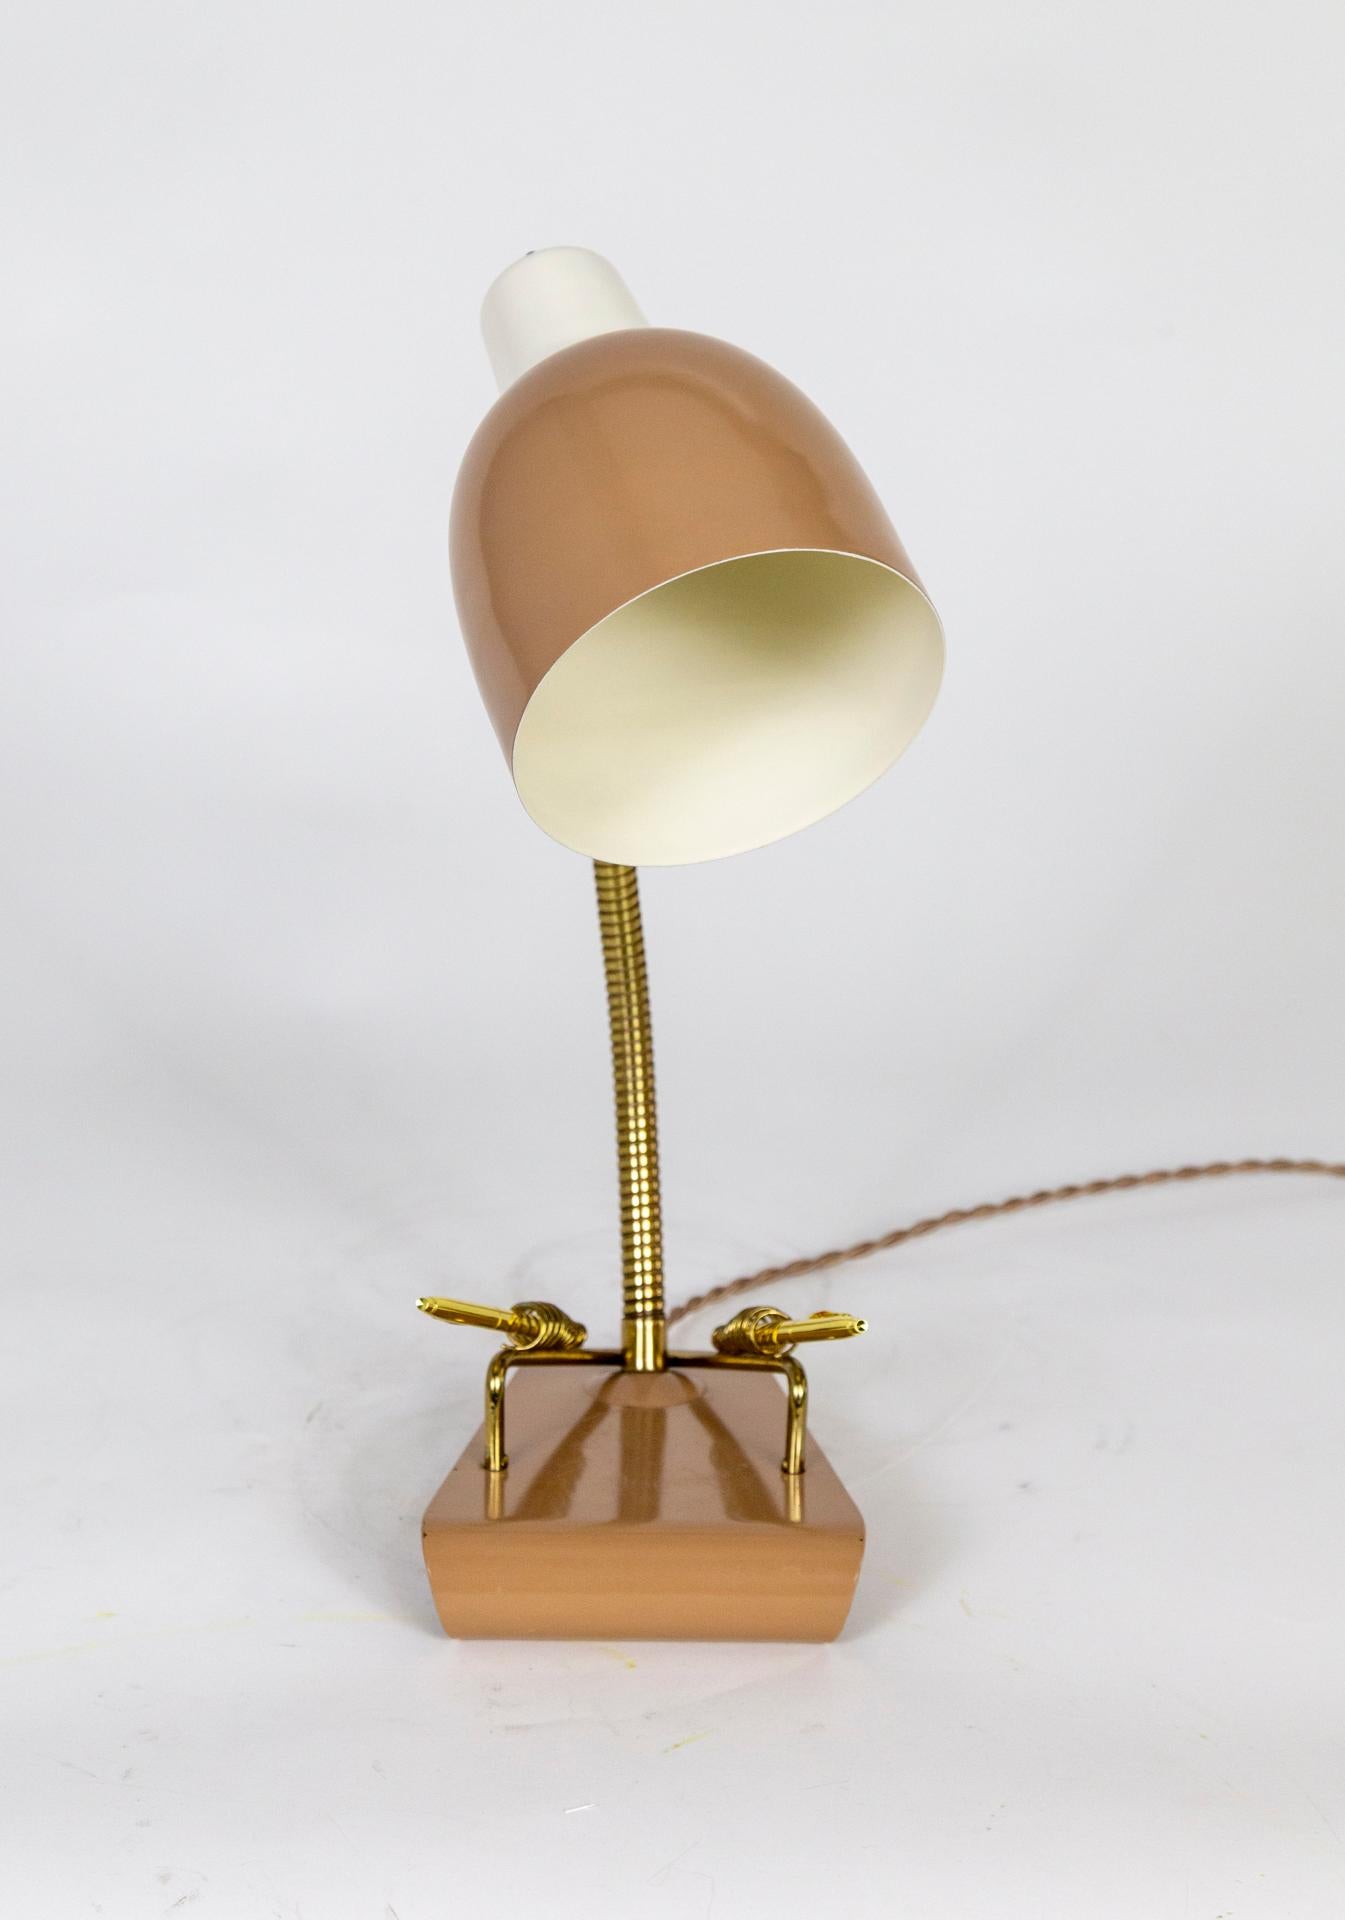 A Mid-Century Modern desk lamp with an angled, curled-under base that has two coiled, brass pen holders; echoing the brass, adjustable, hose neck. The base and shade are lacquered in a rich, latte or mushroom tone, with white accent. Push switch;